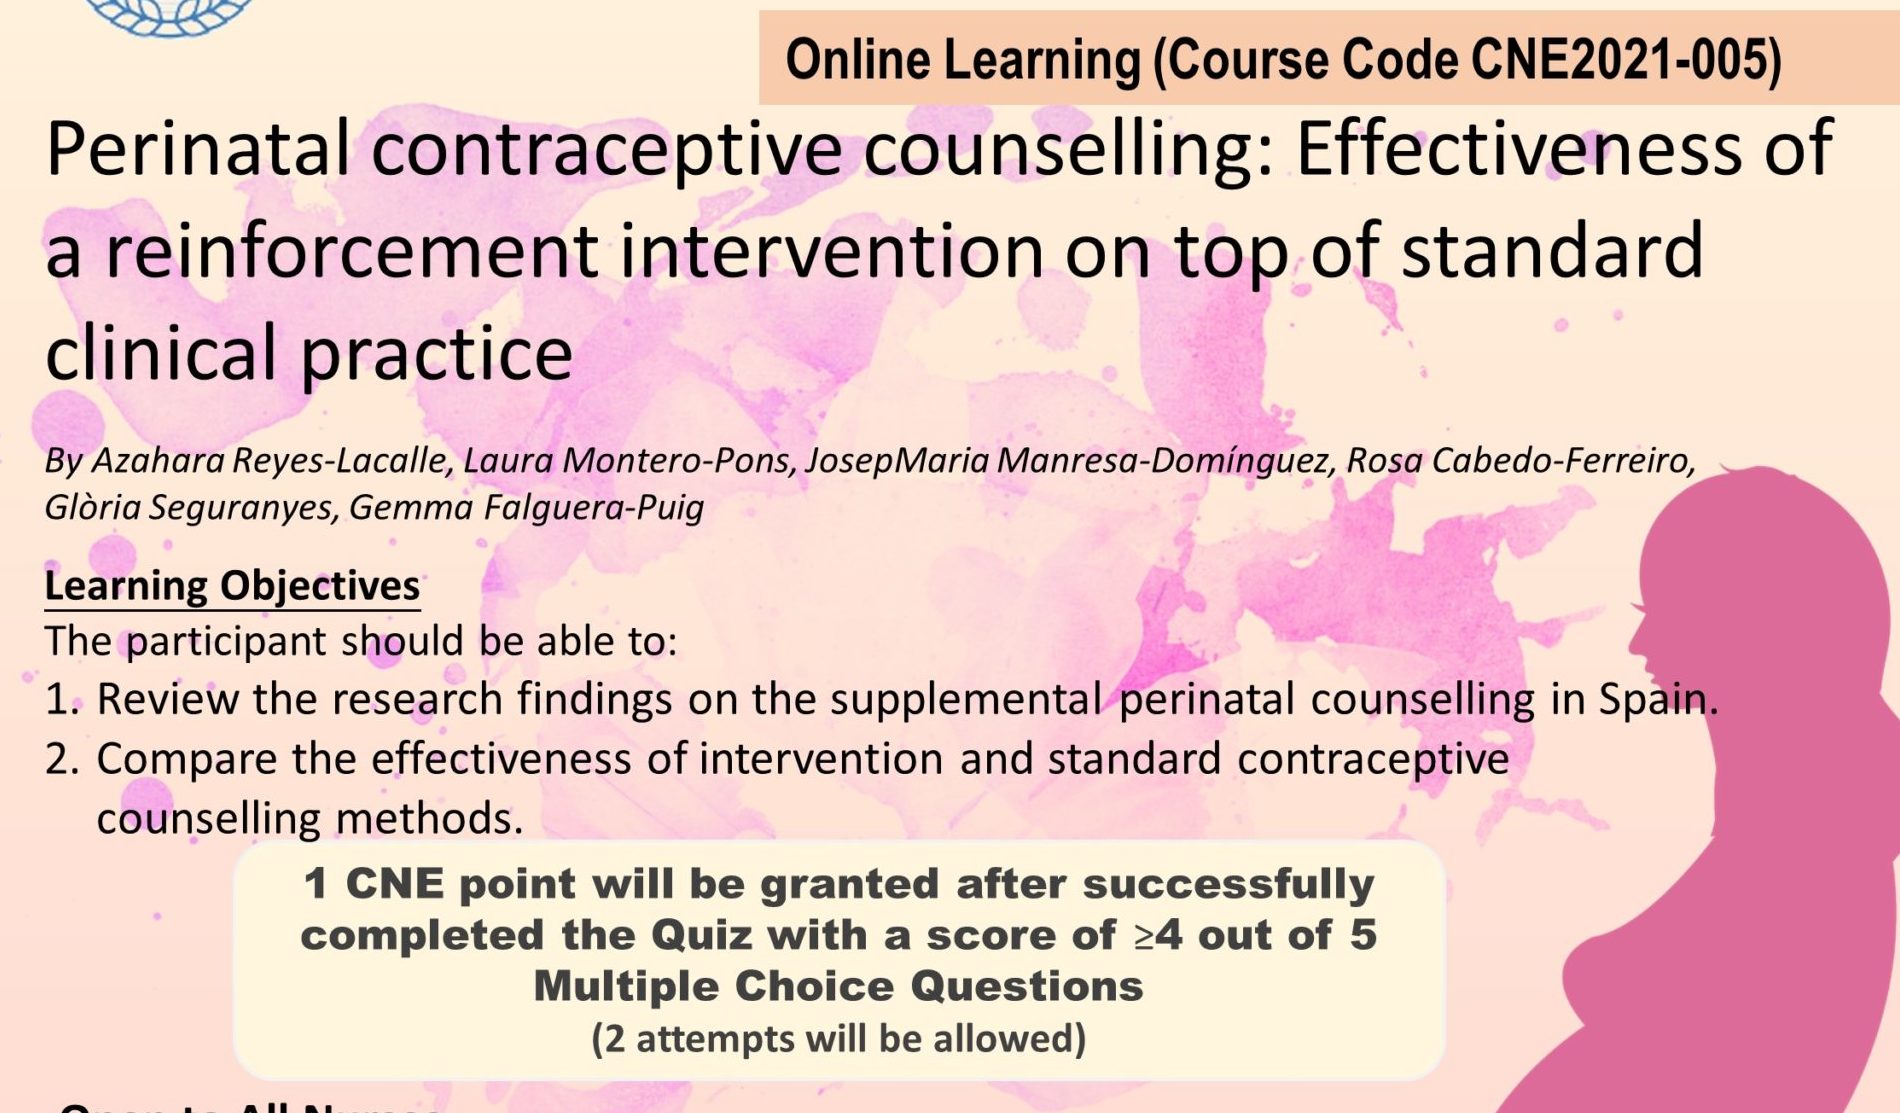 Perinatal contraceptive counselling: Effectiveness of a reinforcement intervention on top of standard clinical practice